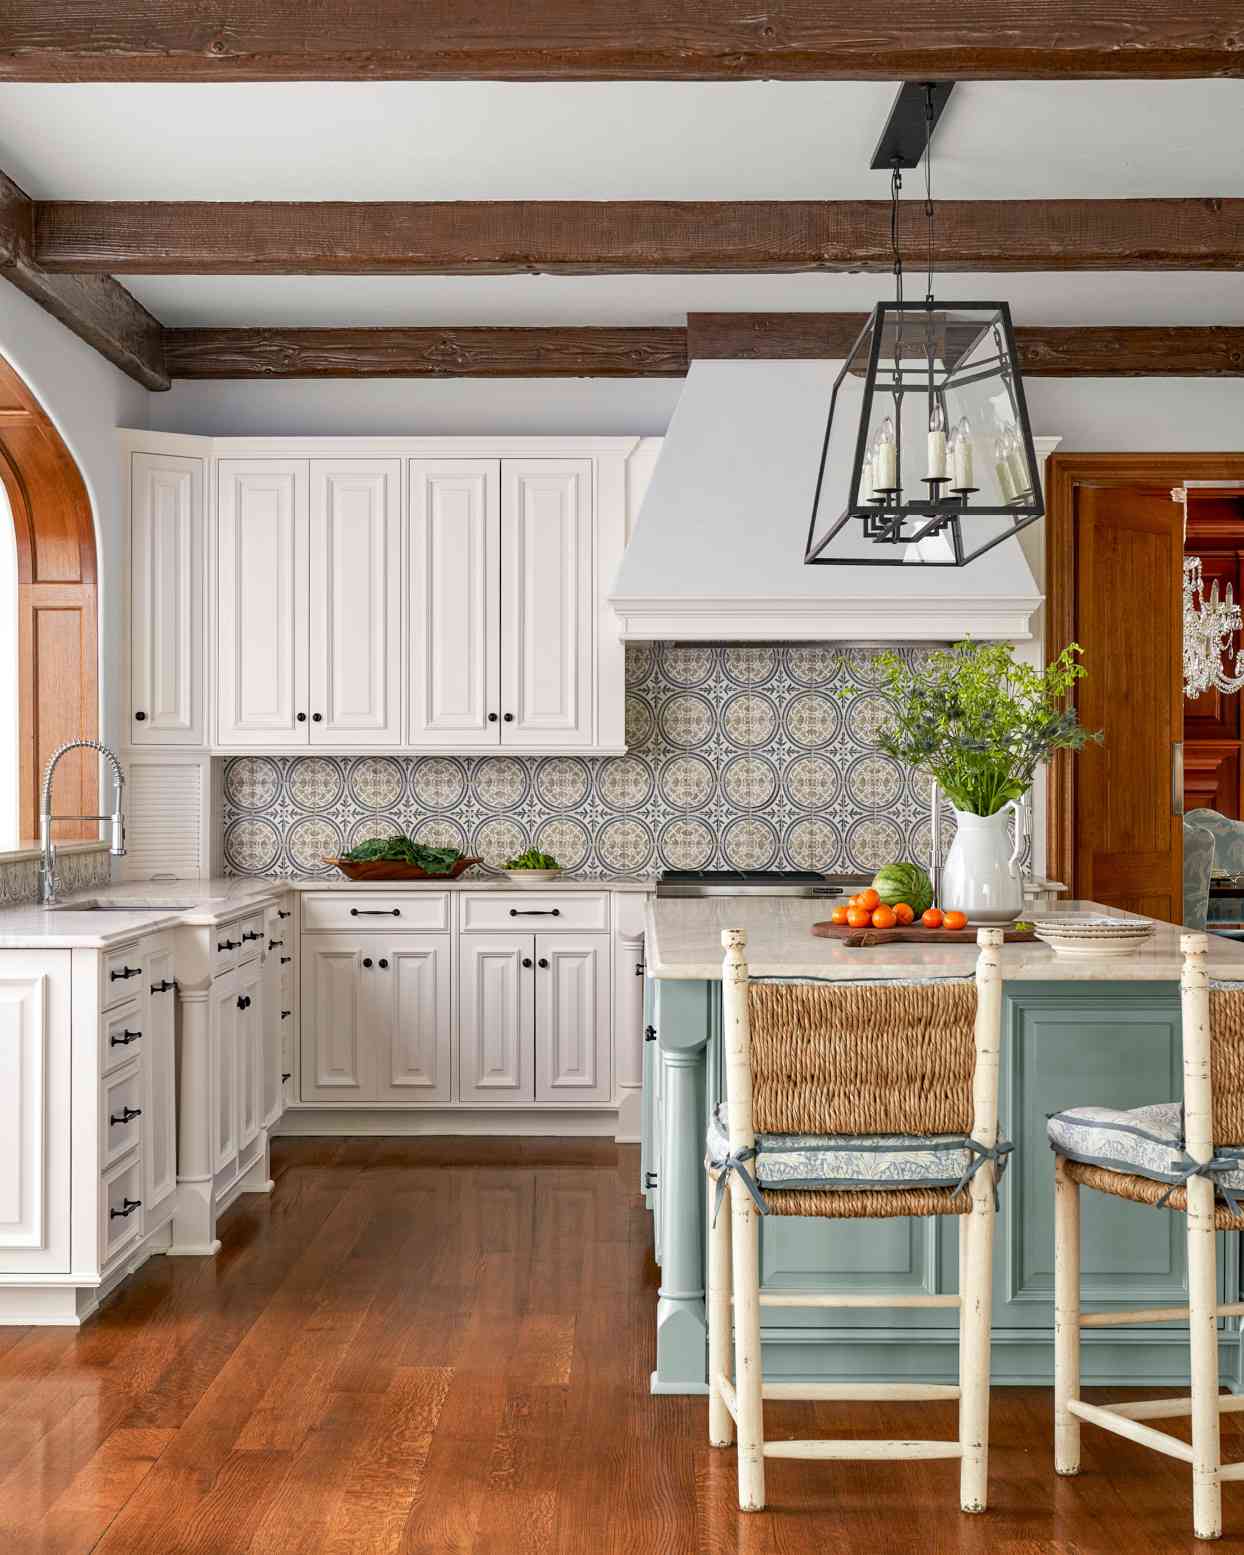 hand-painted backsplash tiles in white and blue kitchen